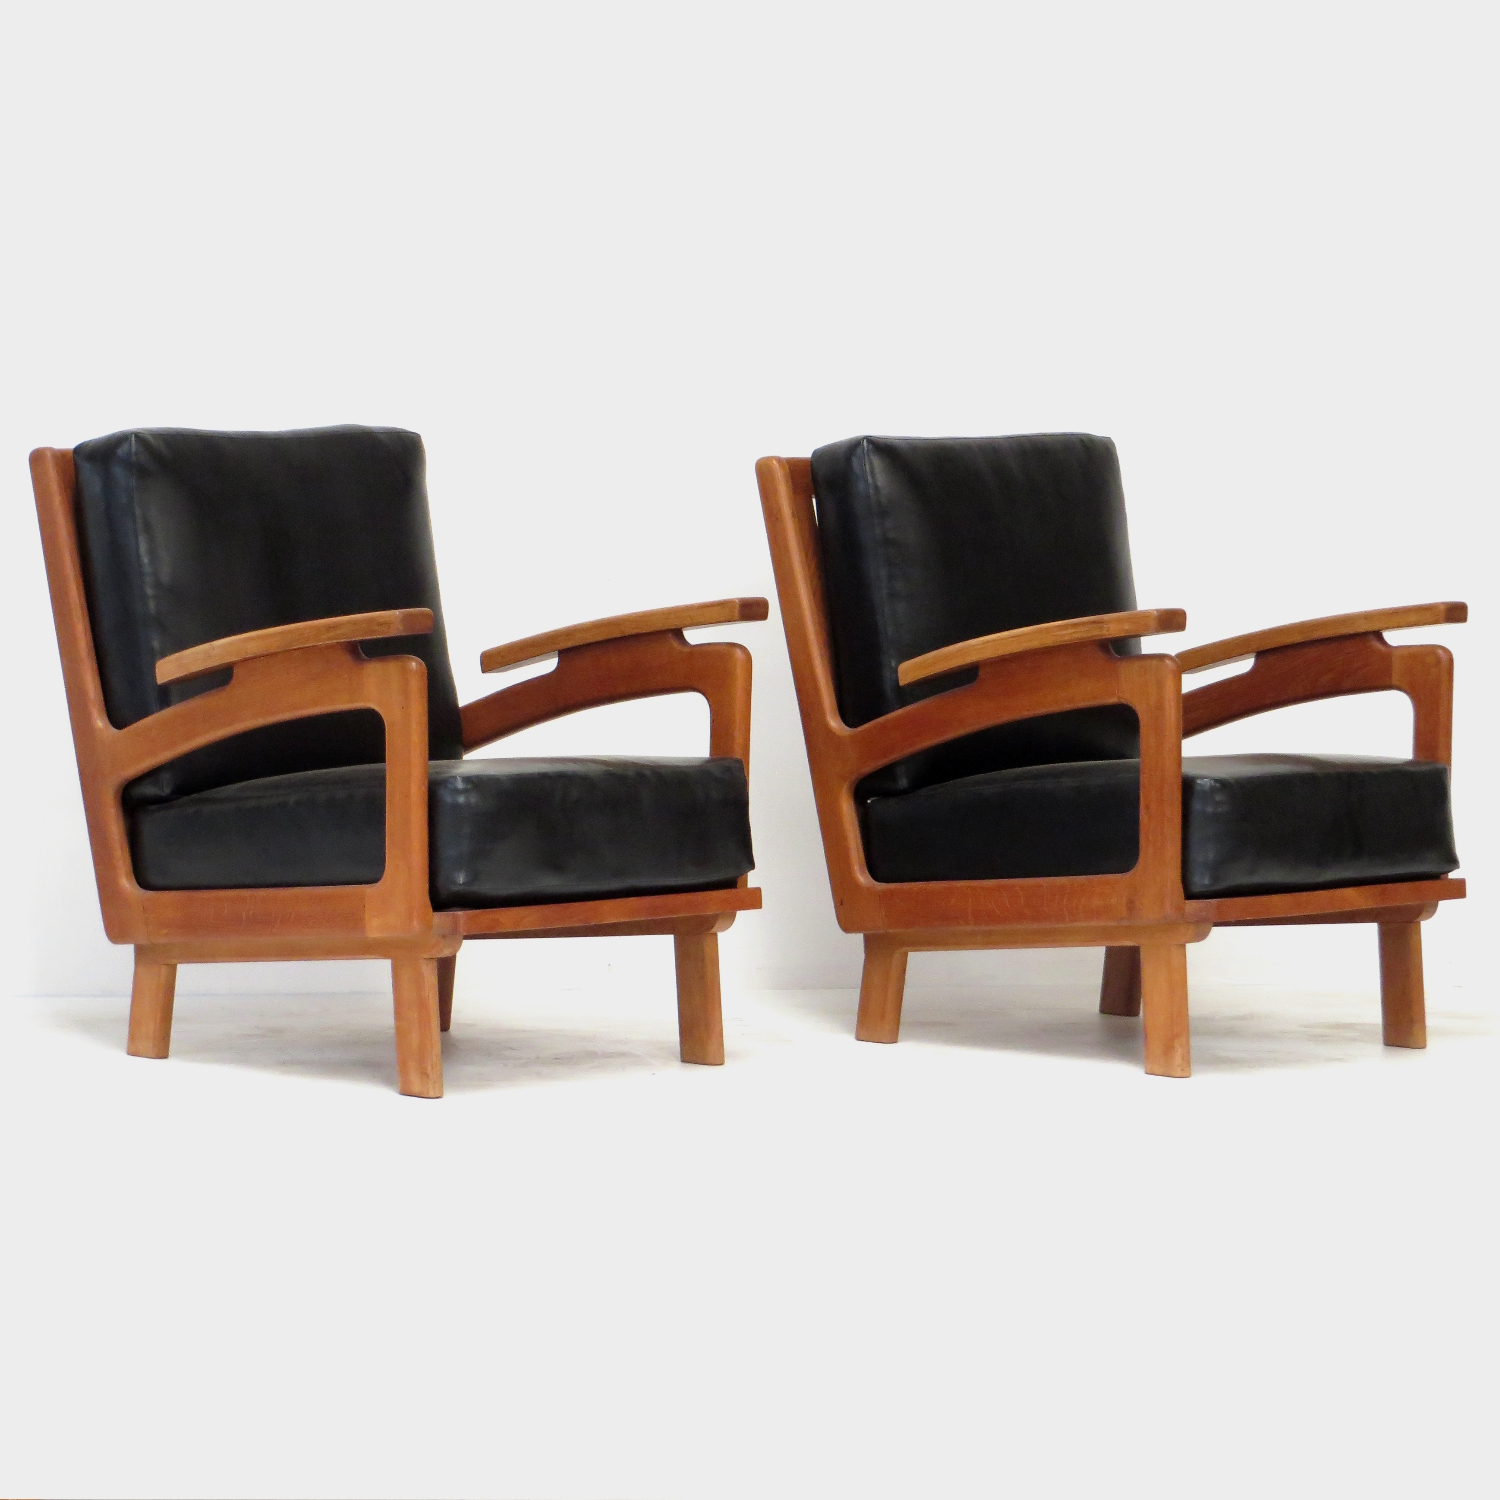 Profile photo of the front of the two vintage lounge armchairs